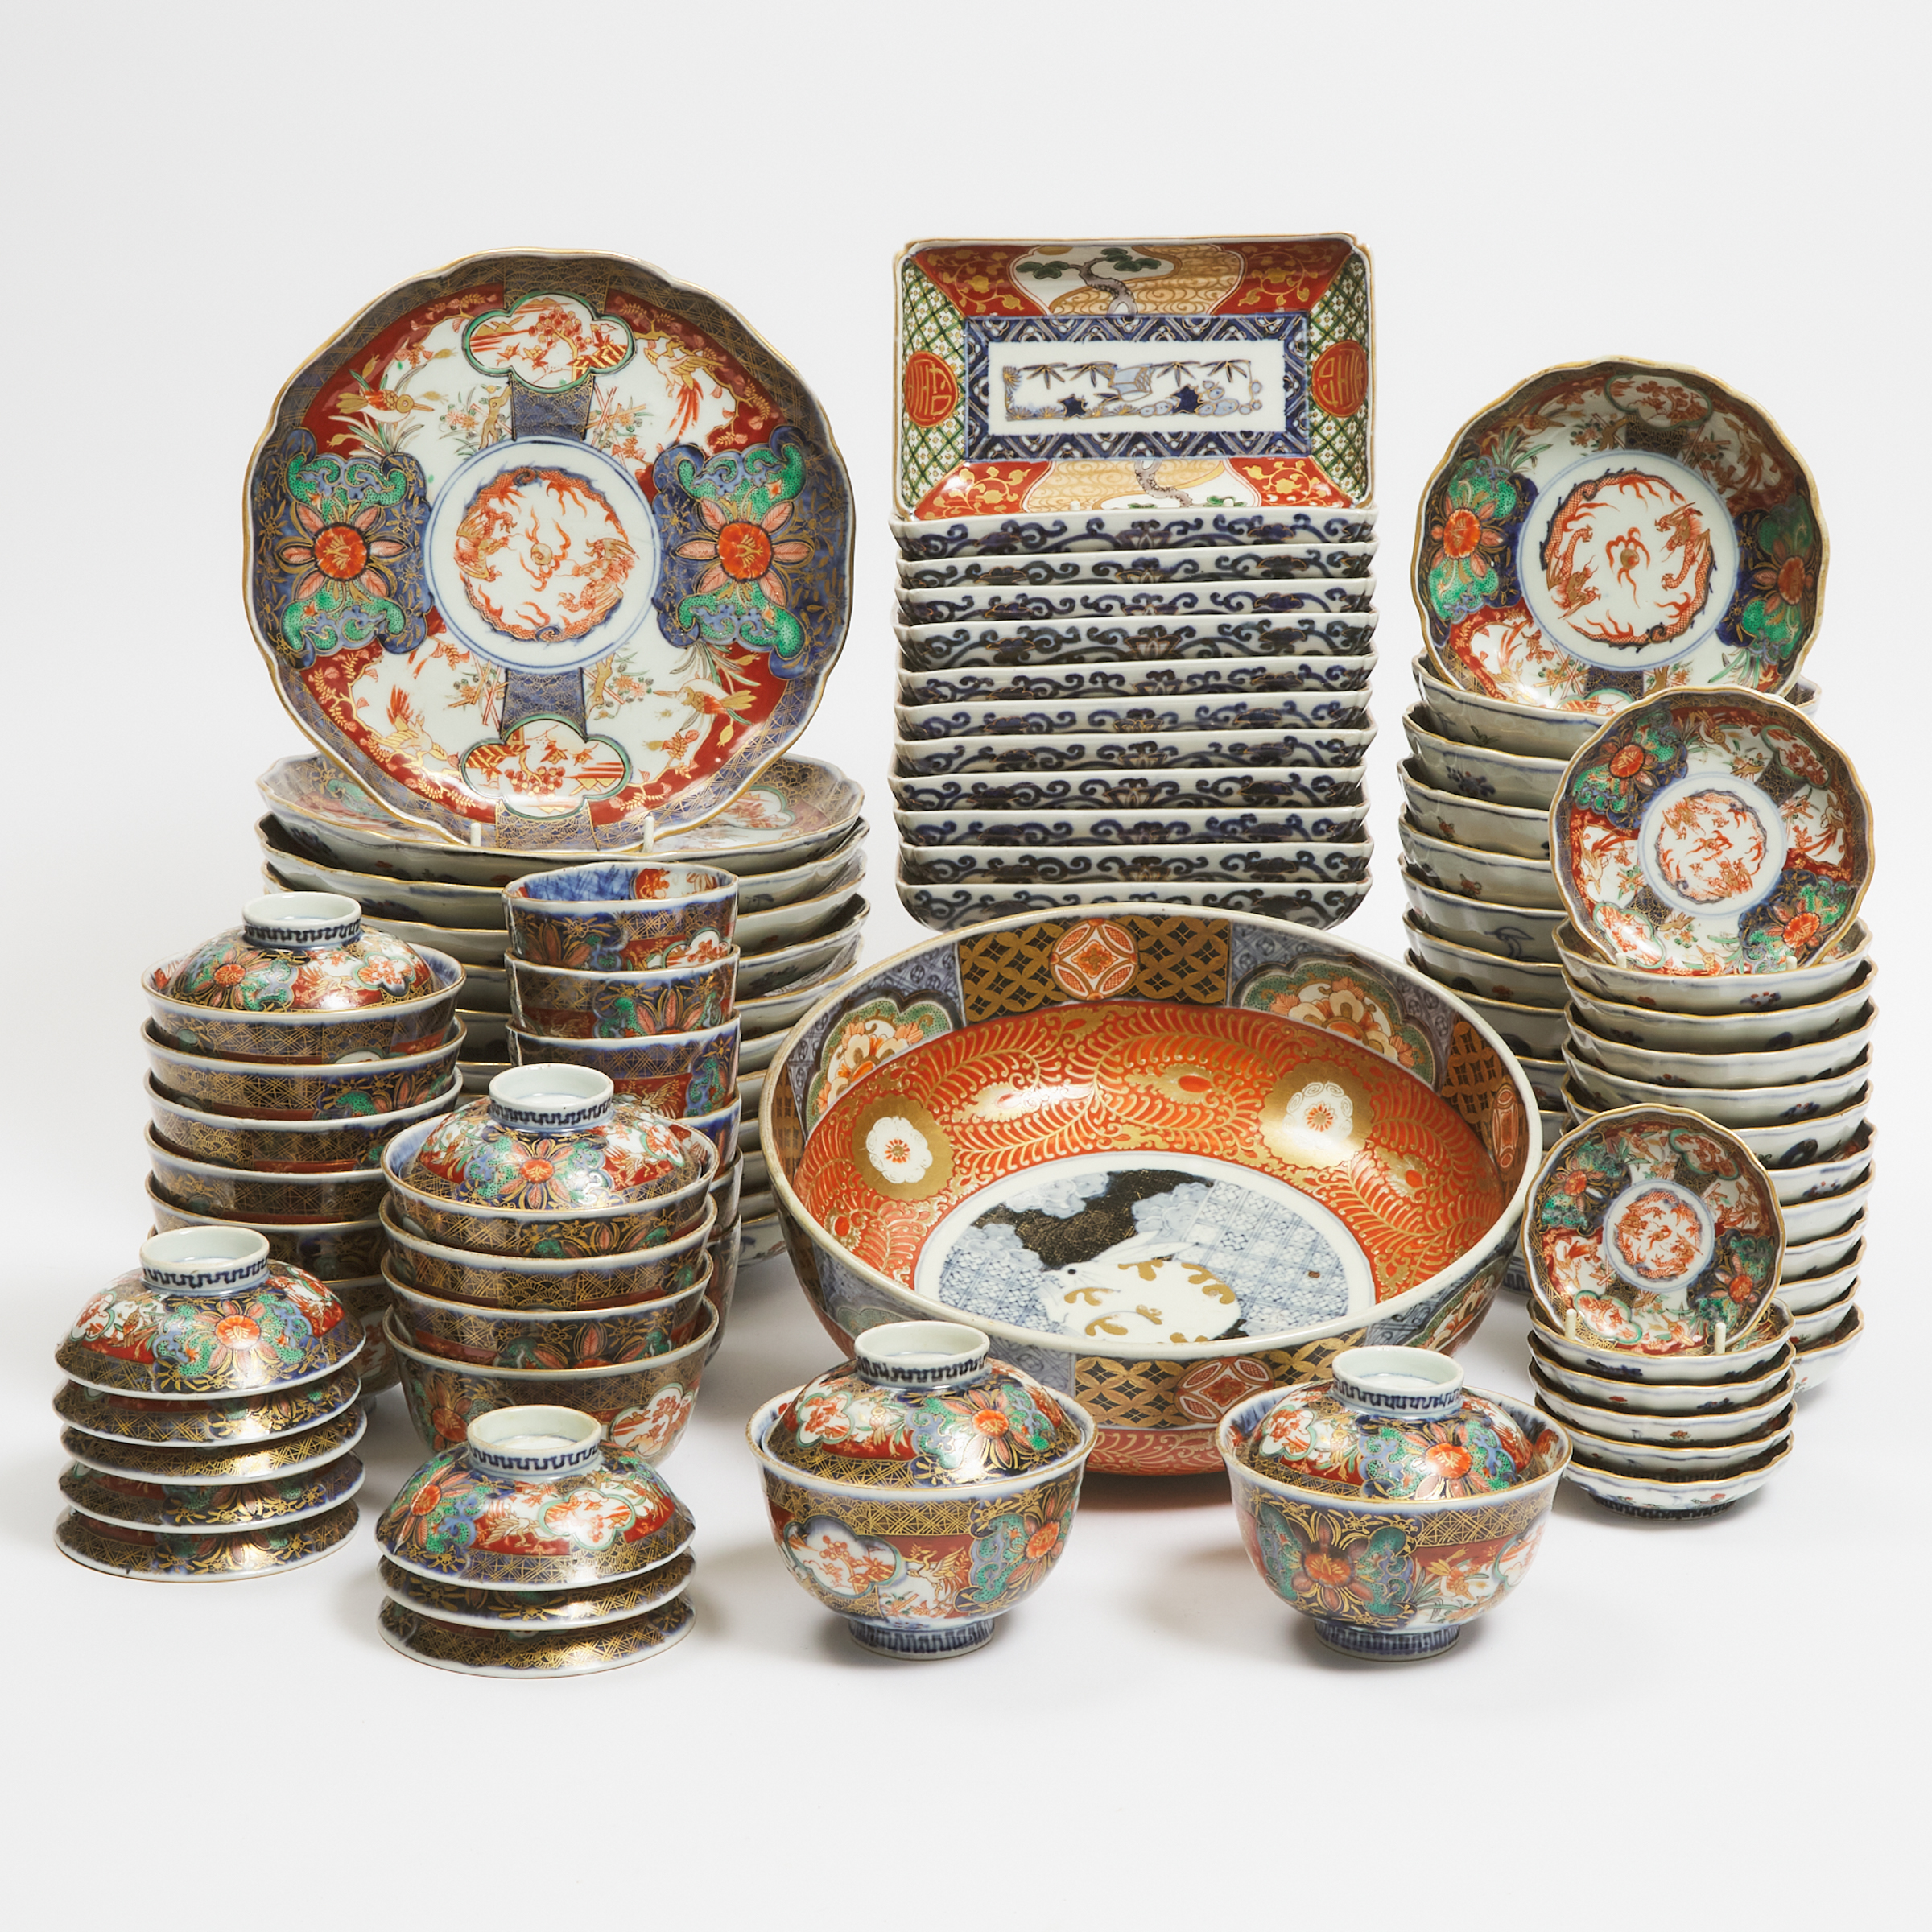 A Large Collection of Seventy-Three Japanese Imari Porcelain Wares, Meiji Period (1868-1912)